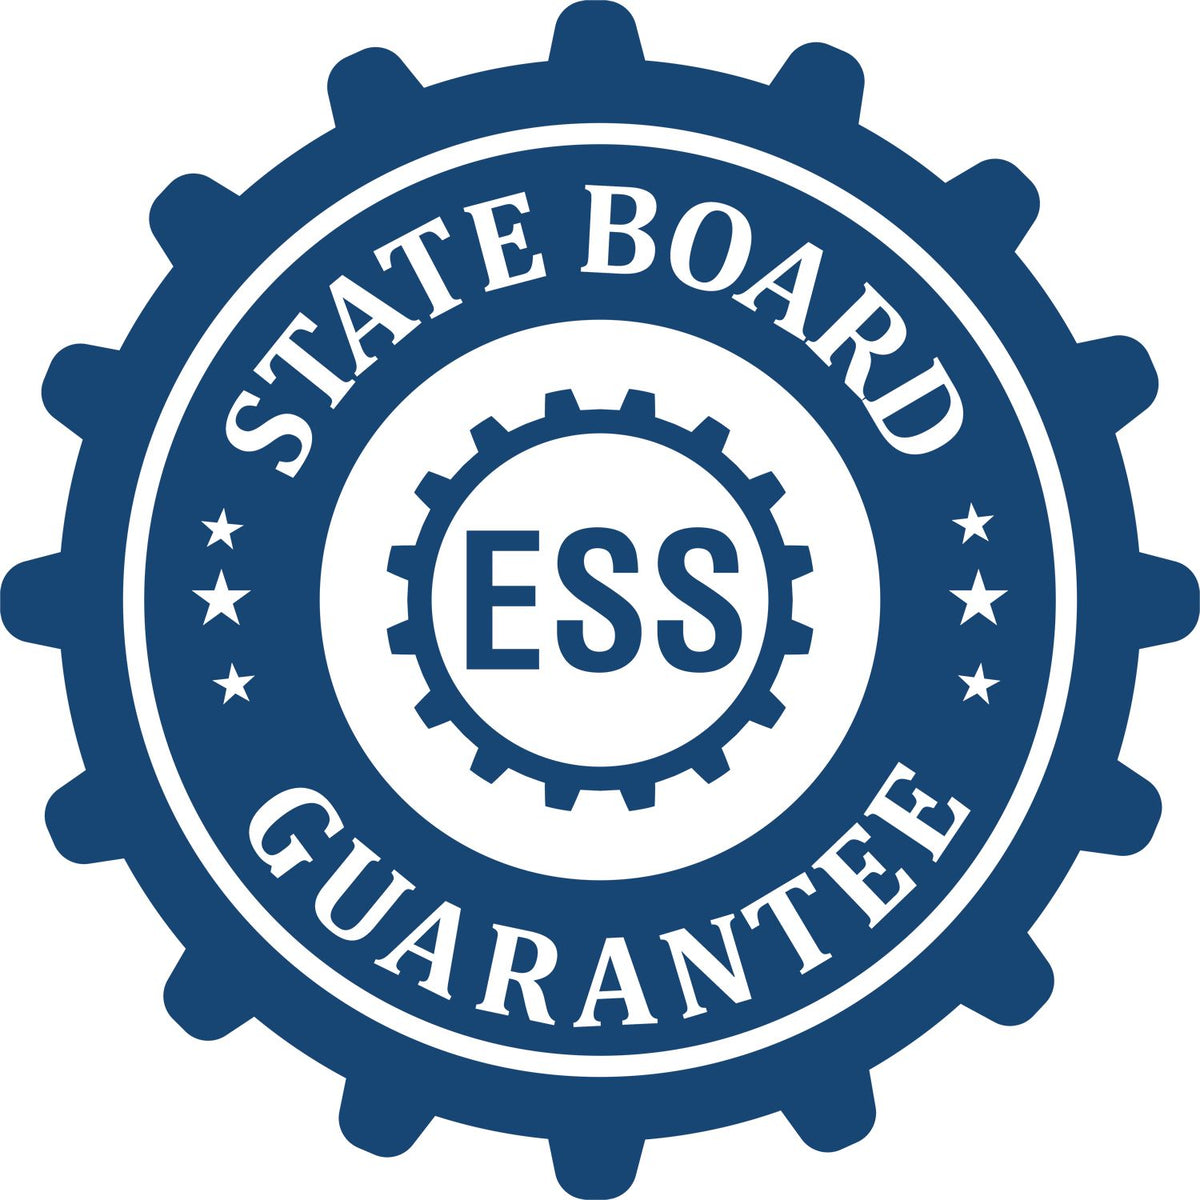 An emblem in a gear shape illustrating a state board guarantee for the Digital Ohio Geologist Stamp, Electronic Seal for Ohio Geologist